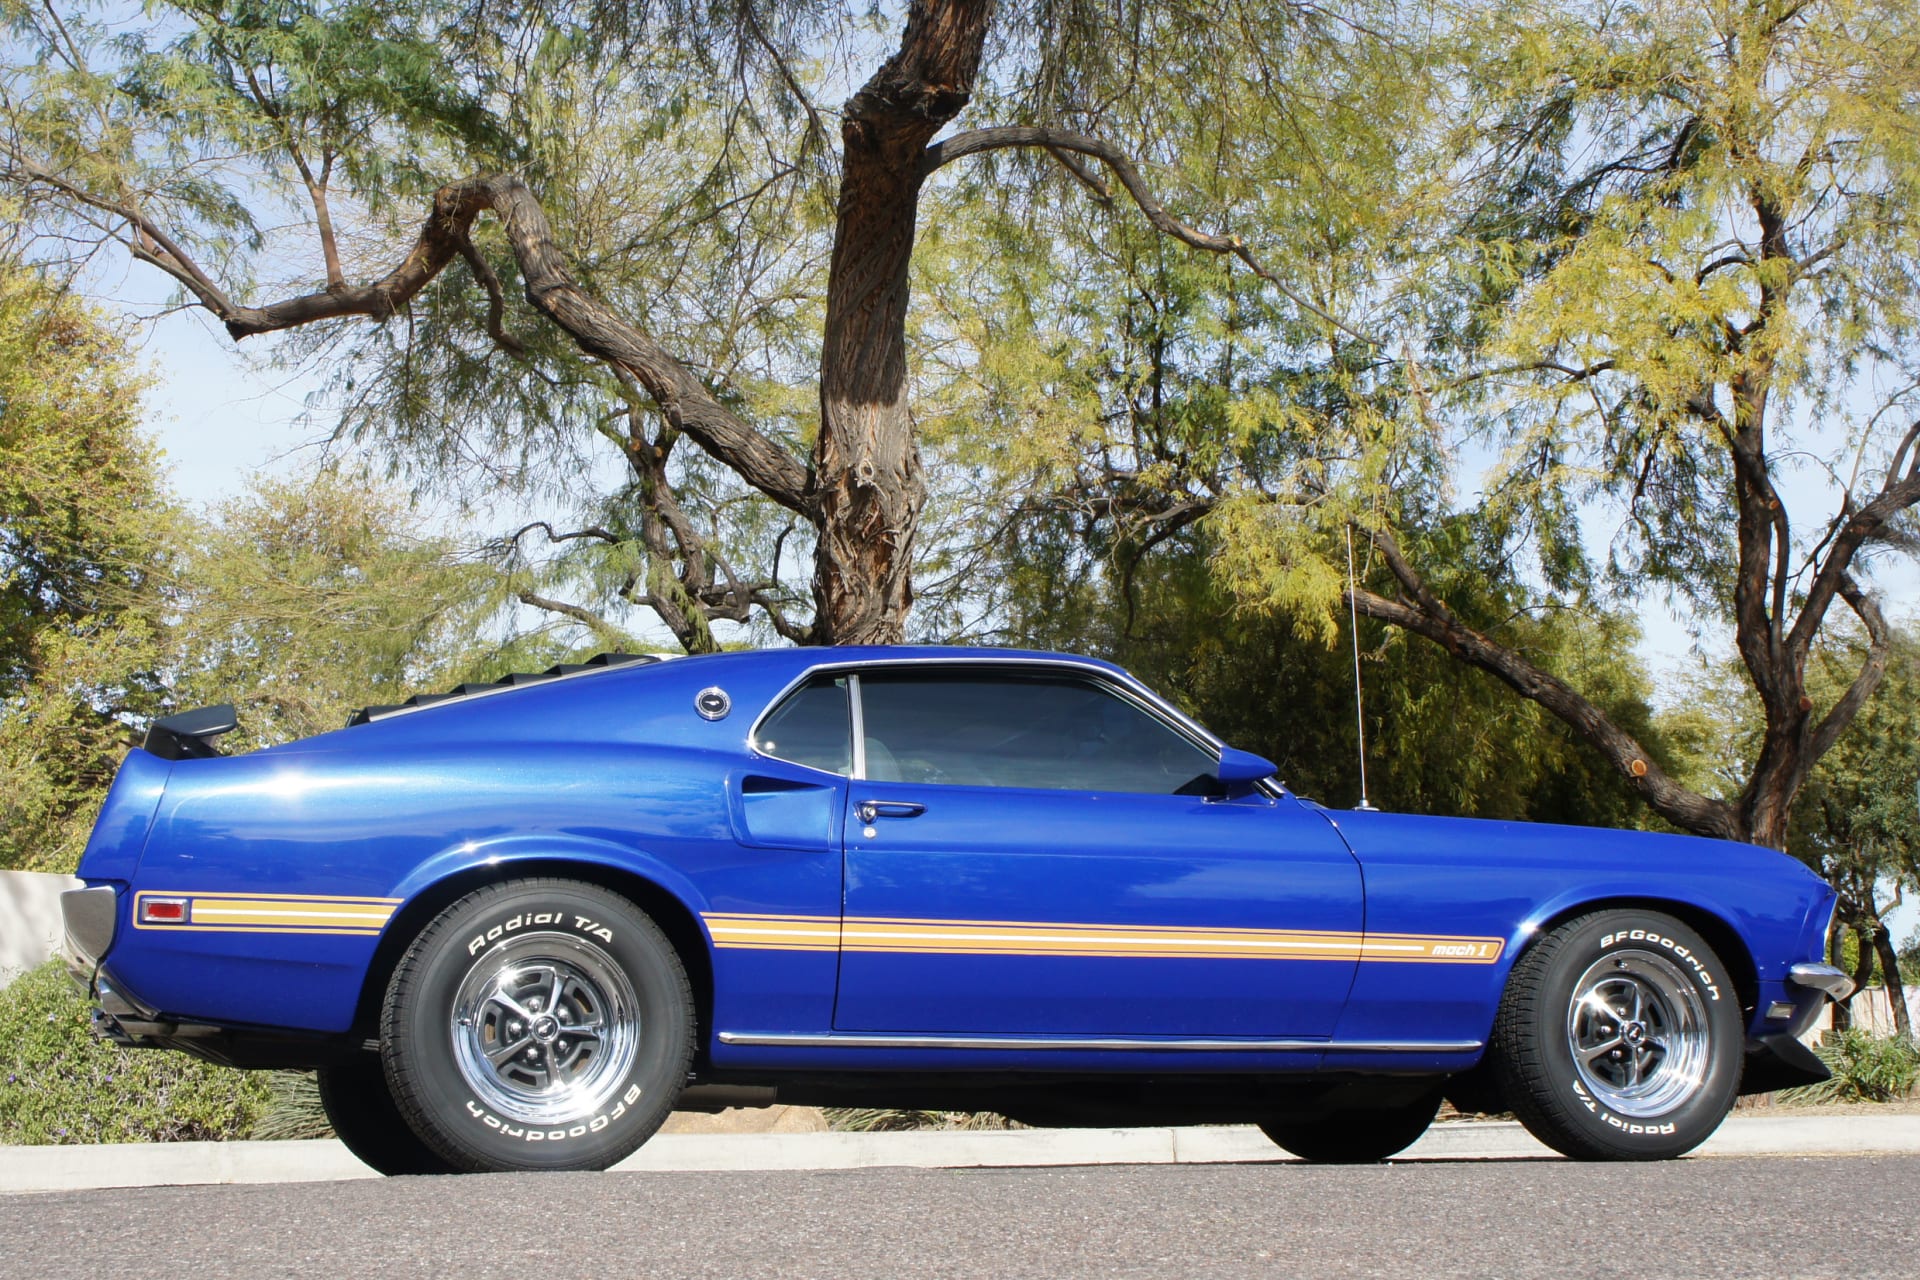 1969 Ford Mustang Mach 1 Fastback at Houston 2014 as S167 - Mecum Auctions